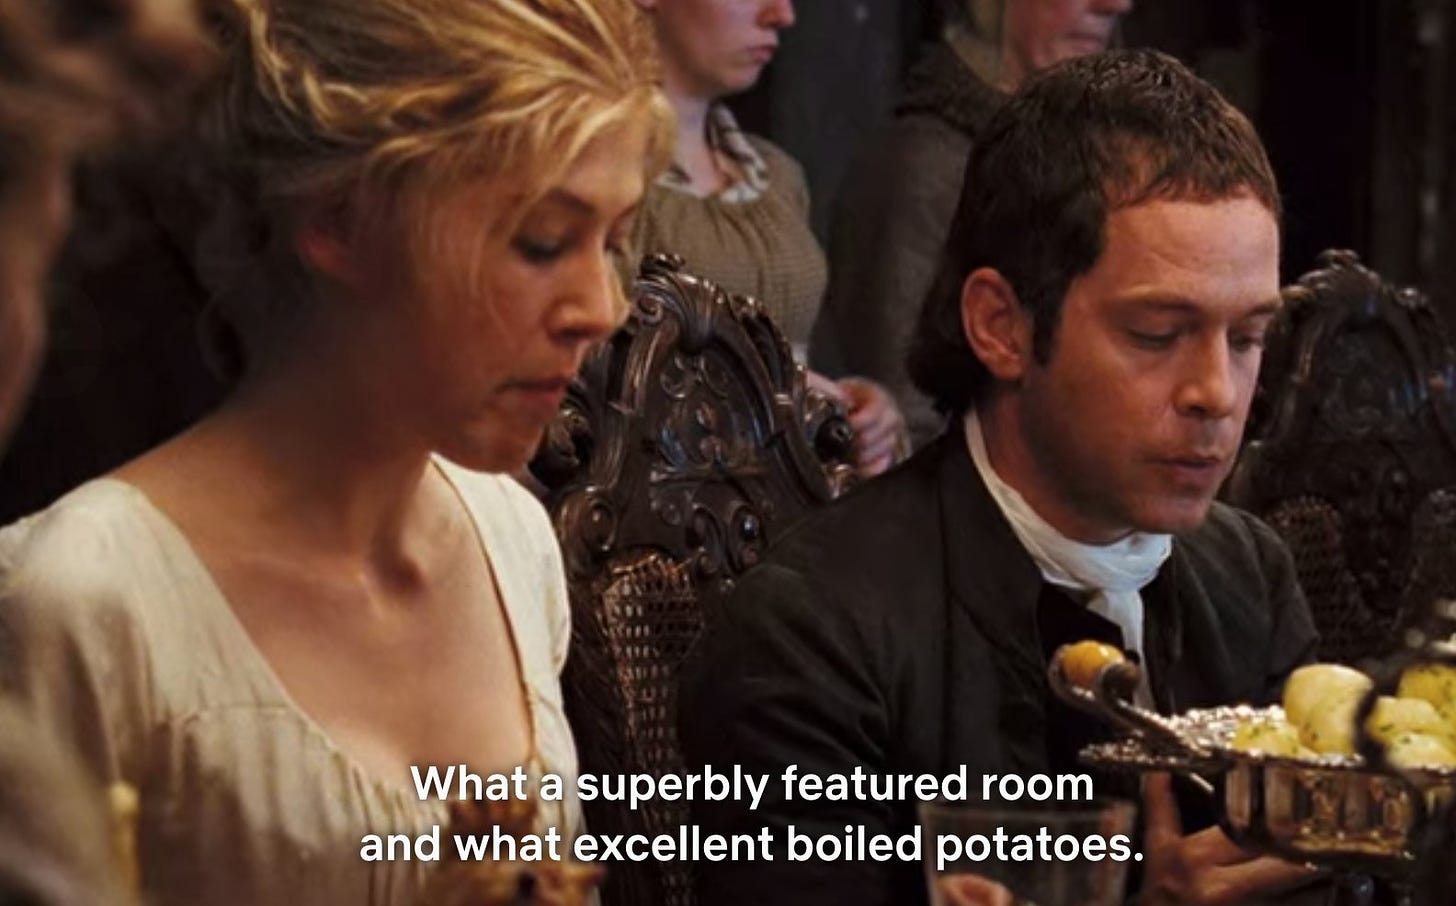 Vulture on X: "What excellent boiled potatoes https://t.co/Jk6hNW3zL4" / X